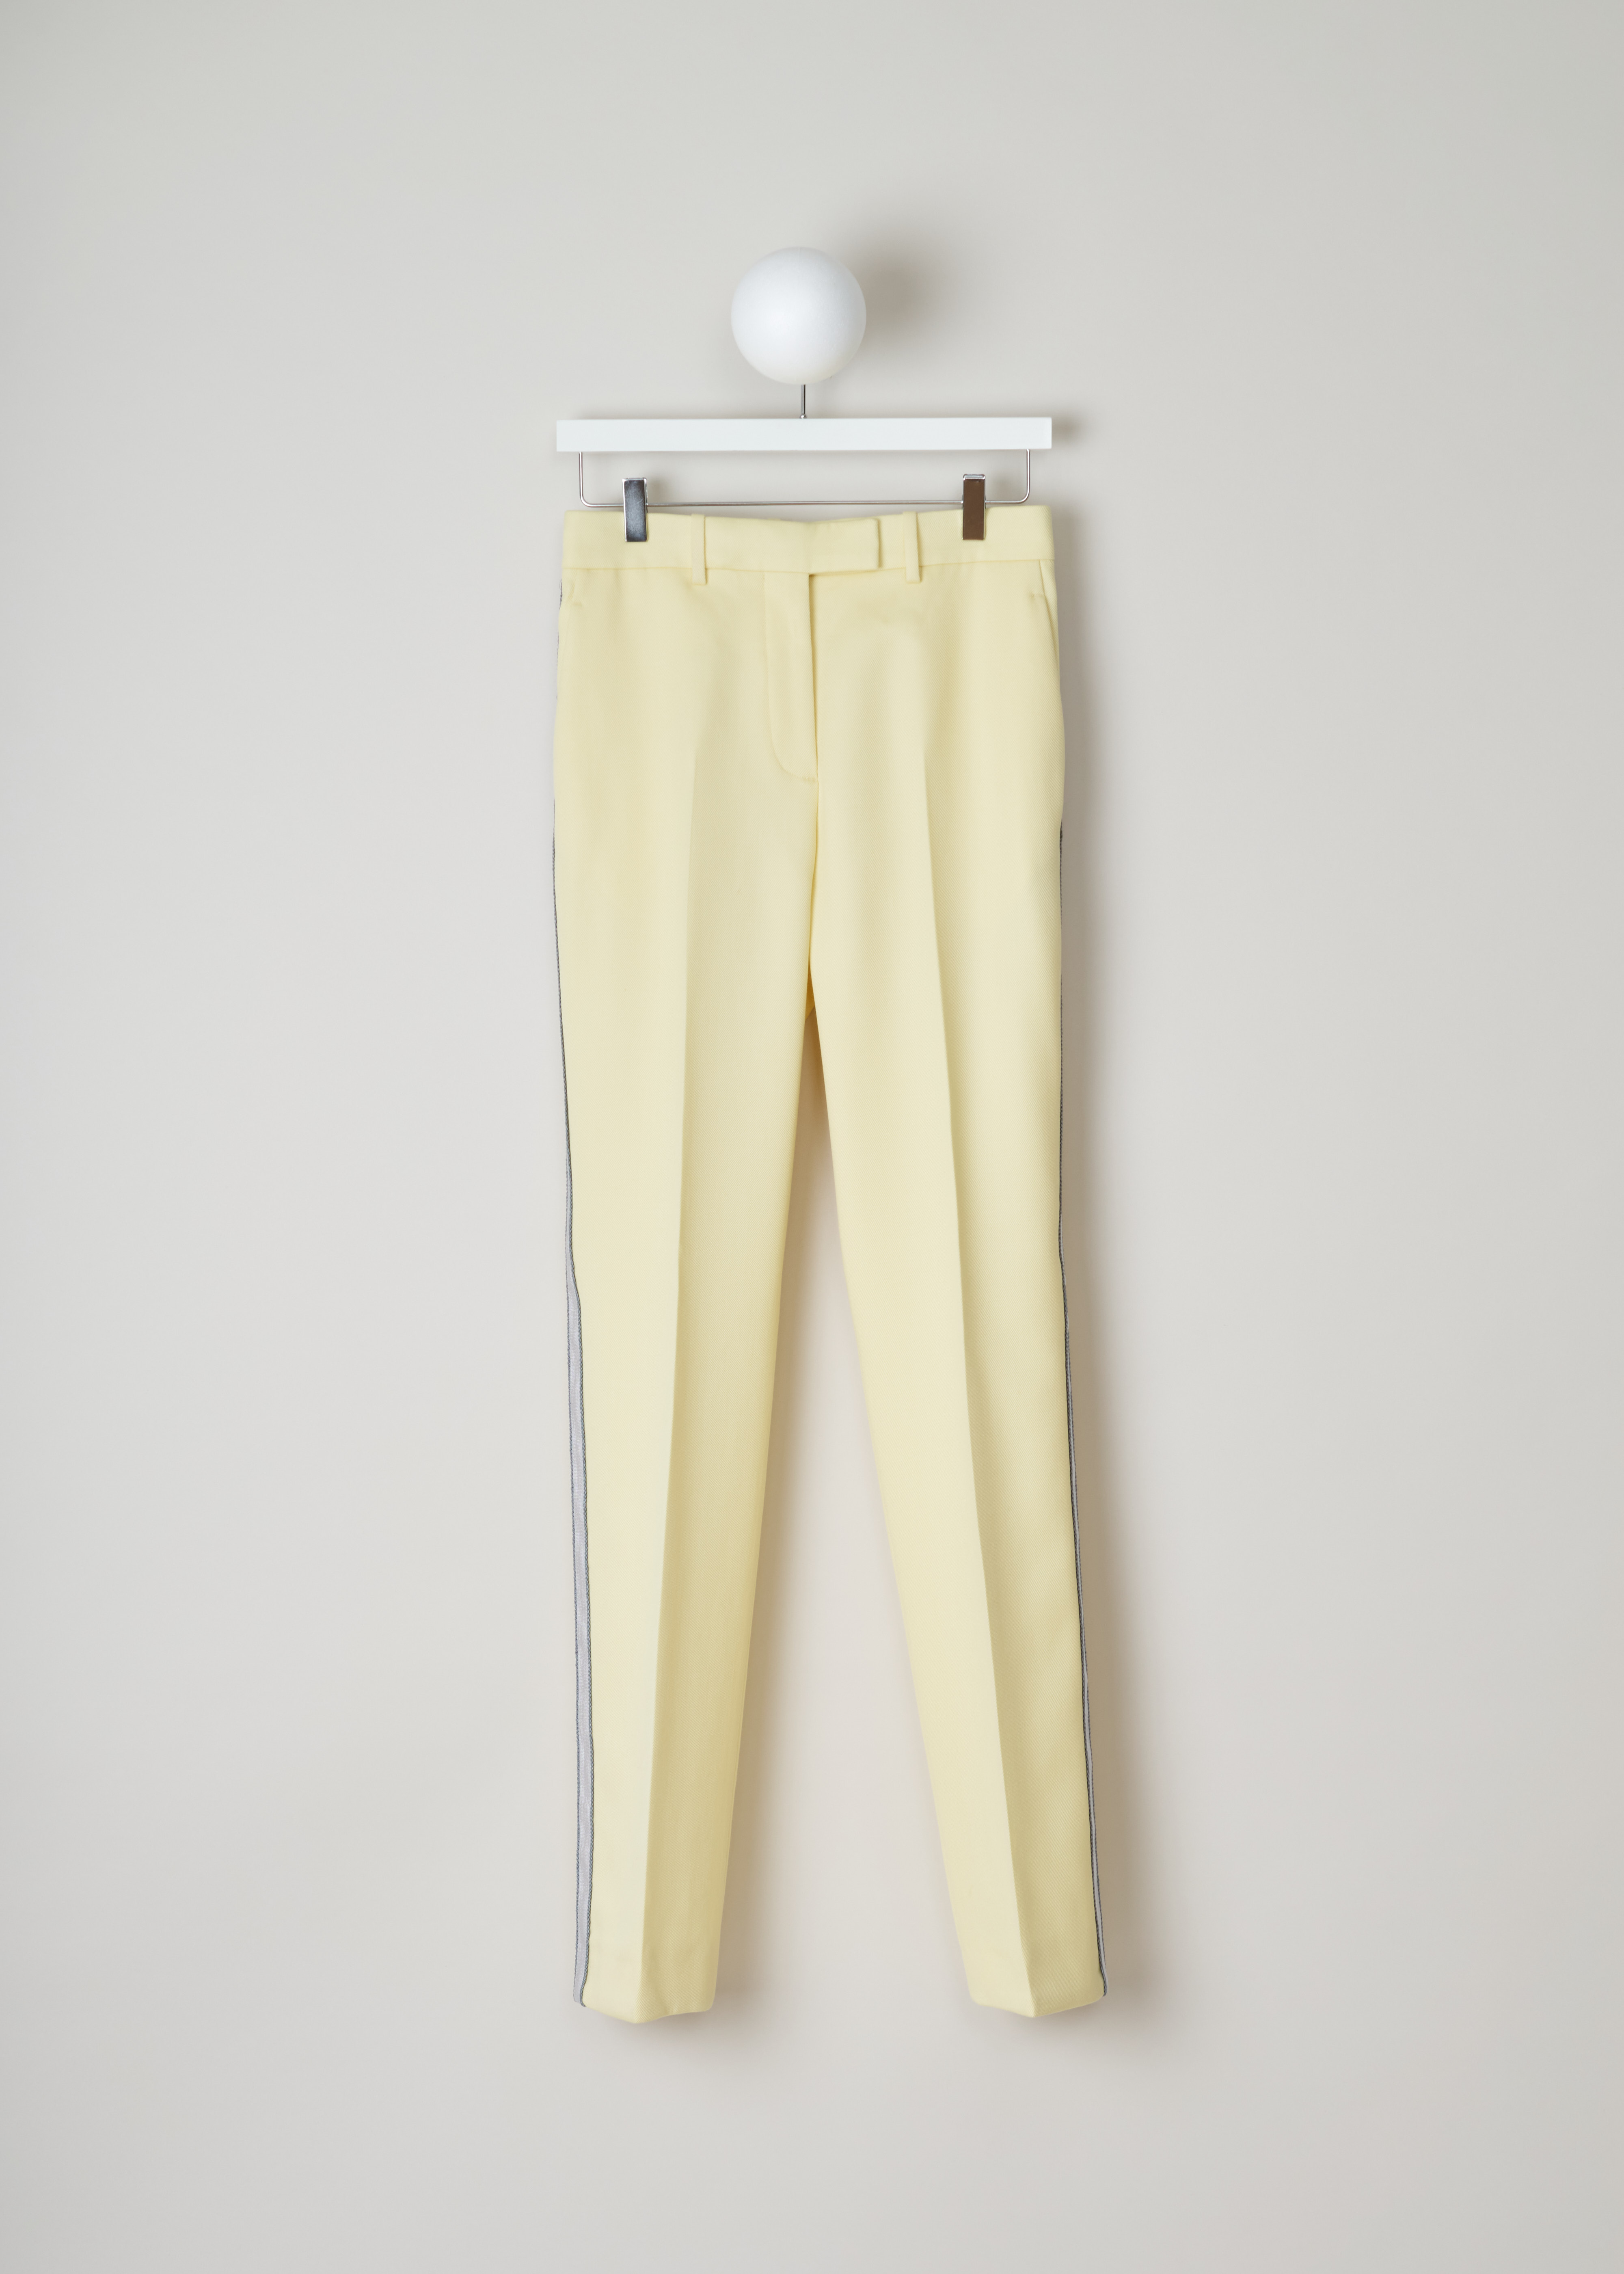 Calvin Klein 205W39NYC Yellow pants with ribbon trim 84WWPB22_W037_764 light yellow pearl front. Yellow trousers with side piping in white and blue, centre creases, side pockets and a welt pocket on the back.